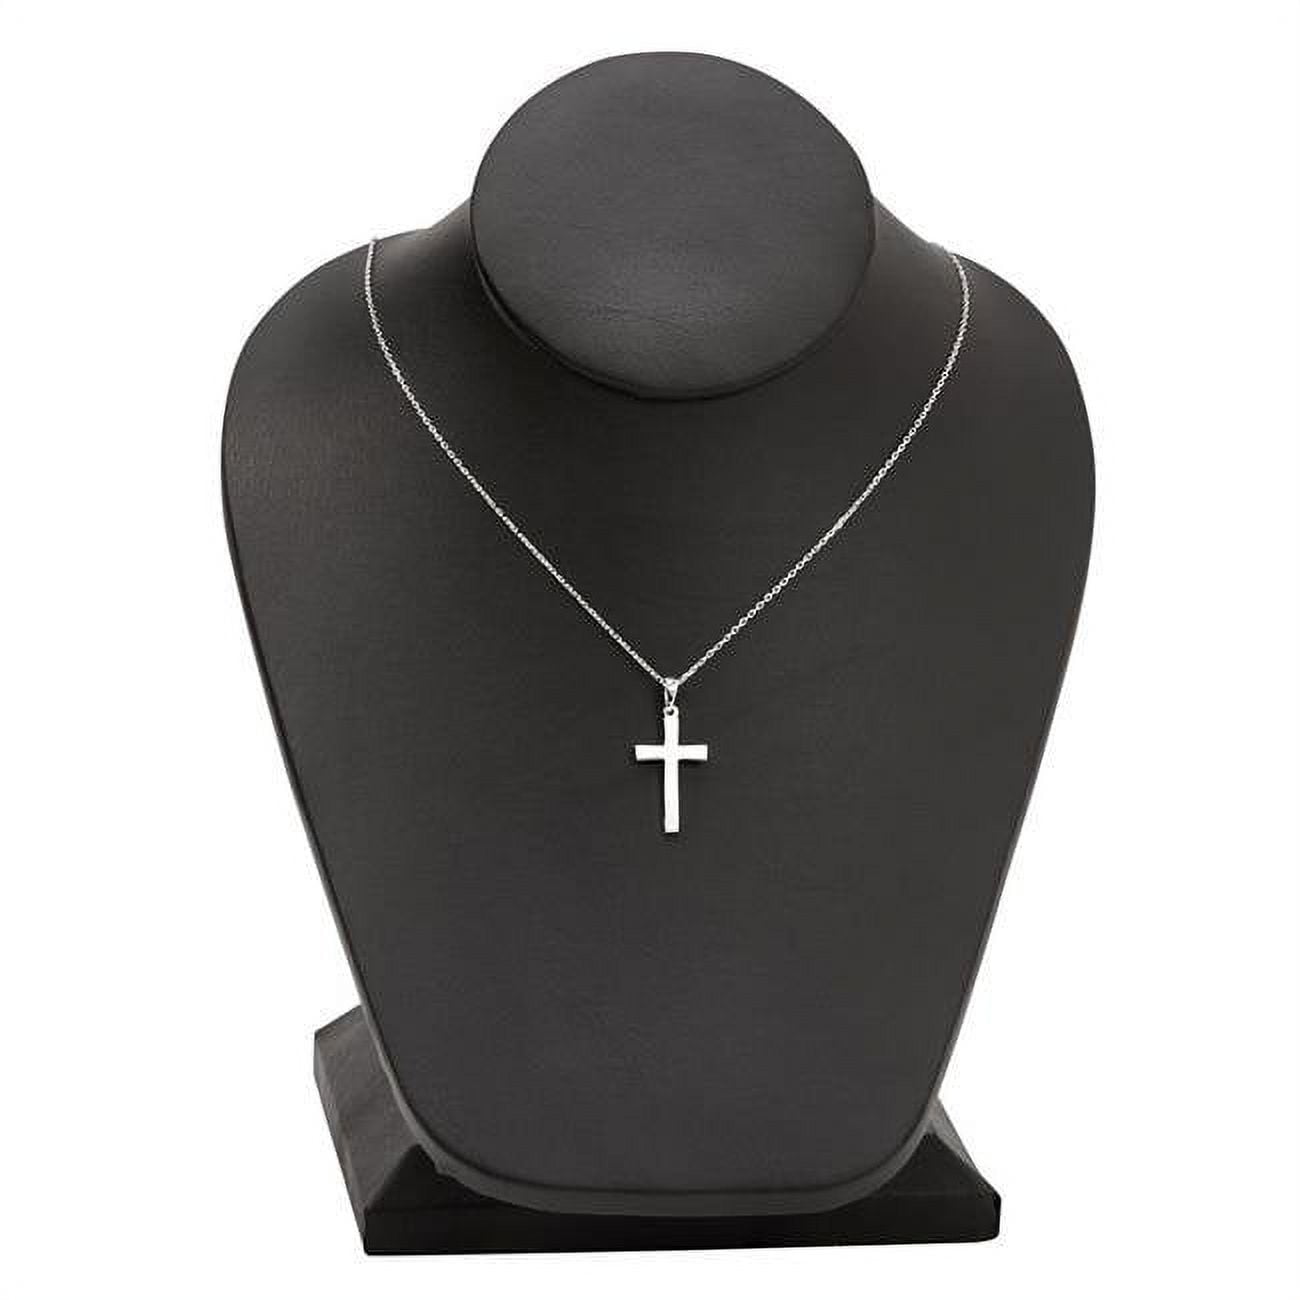 Picture of Creative Gifts 002470 1 x 0.5 in. Sterling Silver Cross Necklace with 18 in. Chain